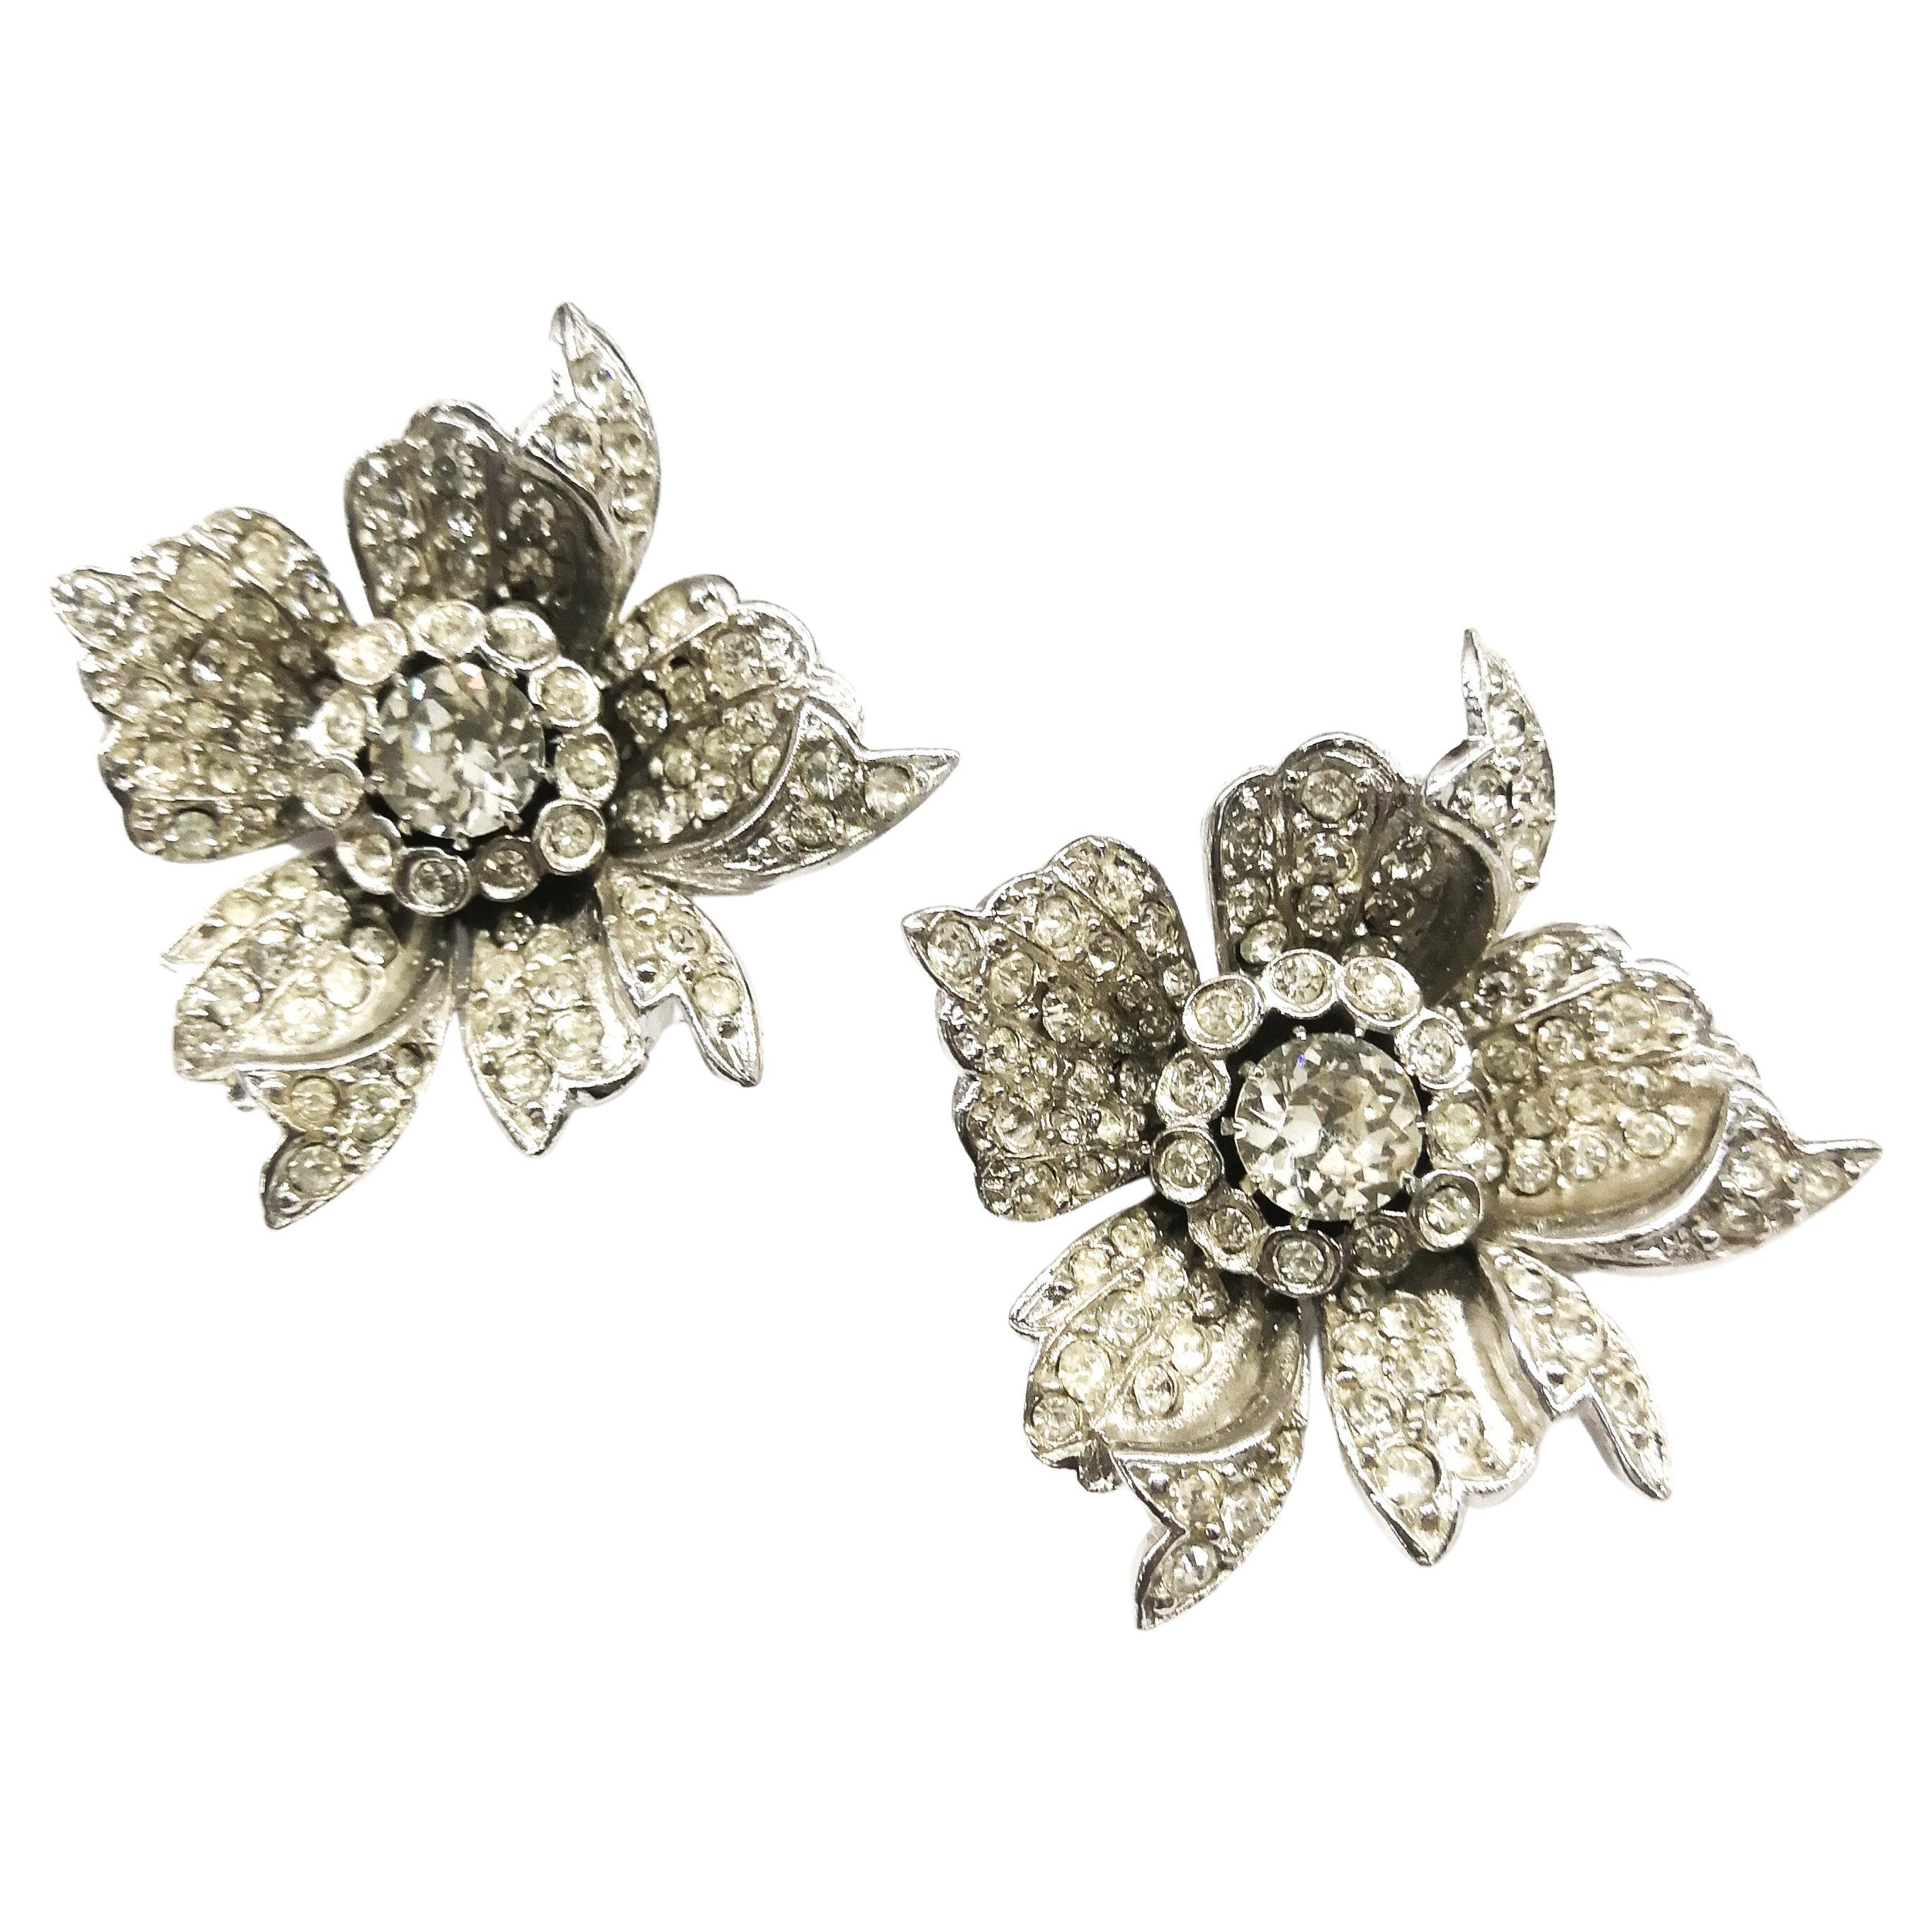 Large clear paste 'Wild Rose' earrings, Christian Dior by Mitchel Maer,  c.1954 at 1stDibs